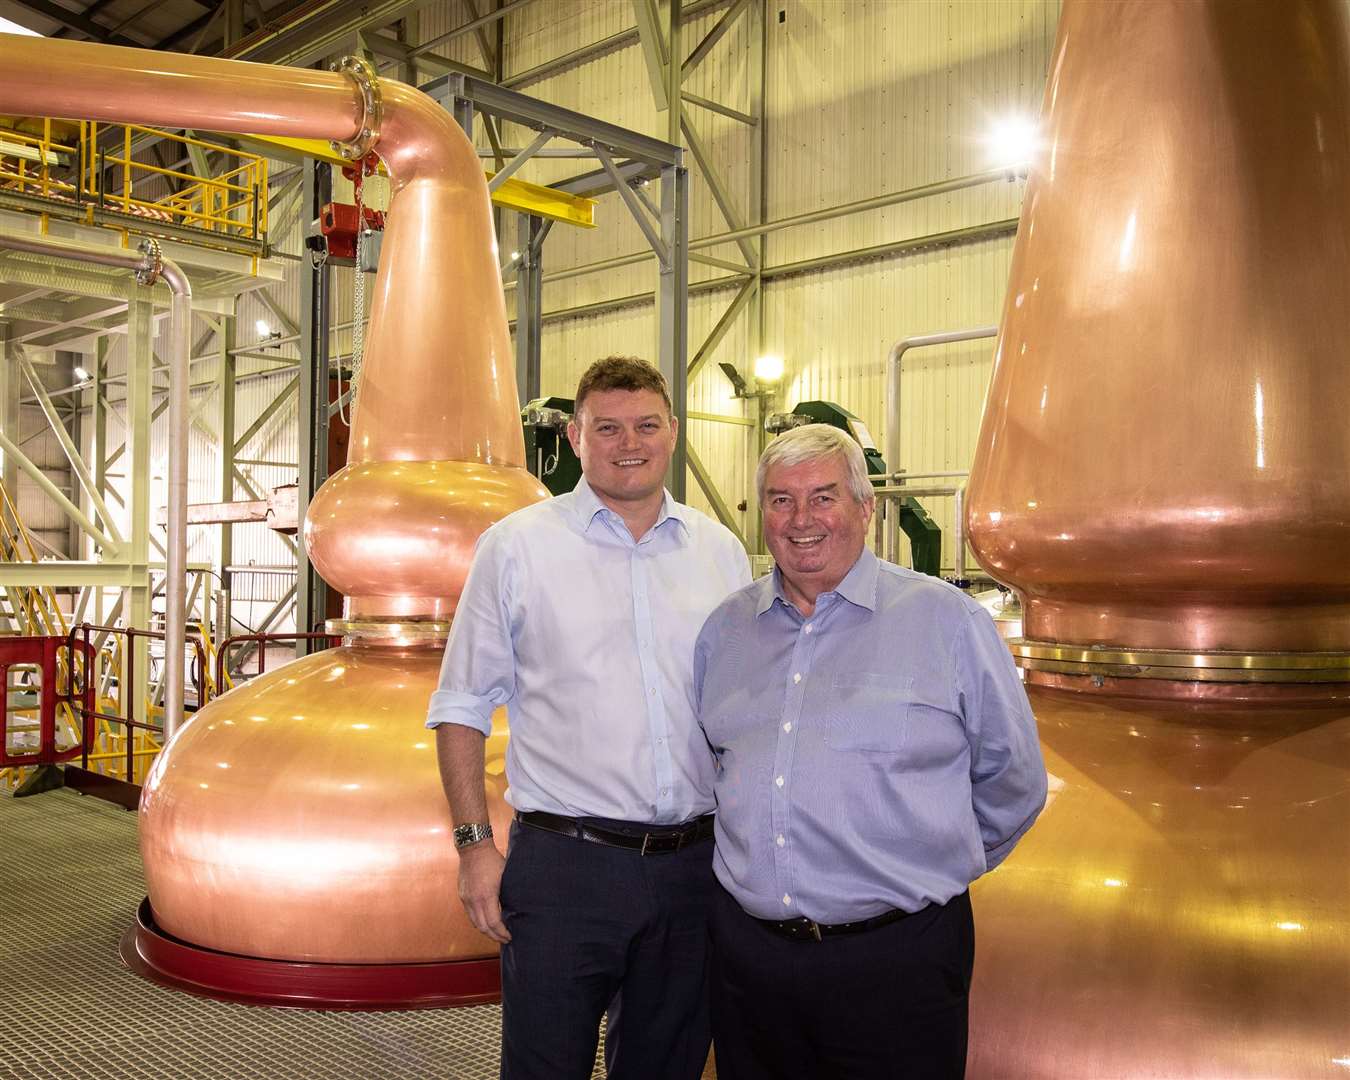 Richard Forsyth snr (right) with his son, also Richard, the current managing director of the business.